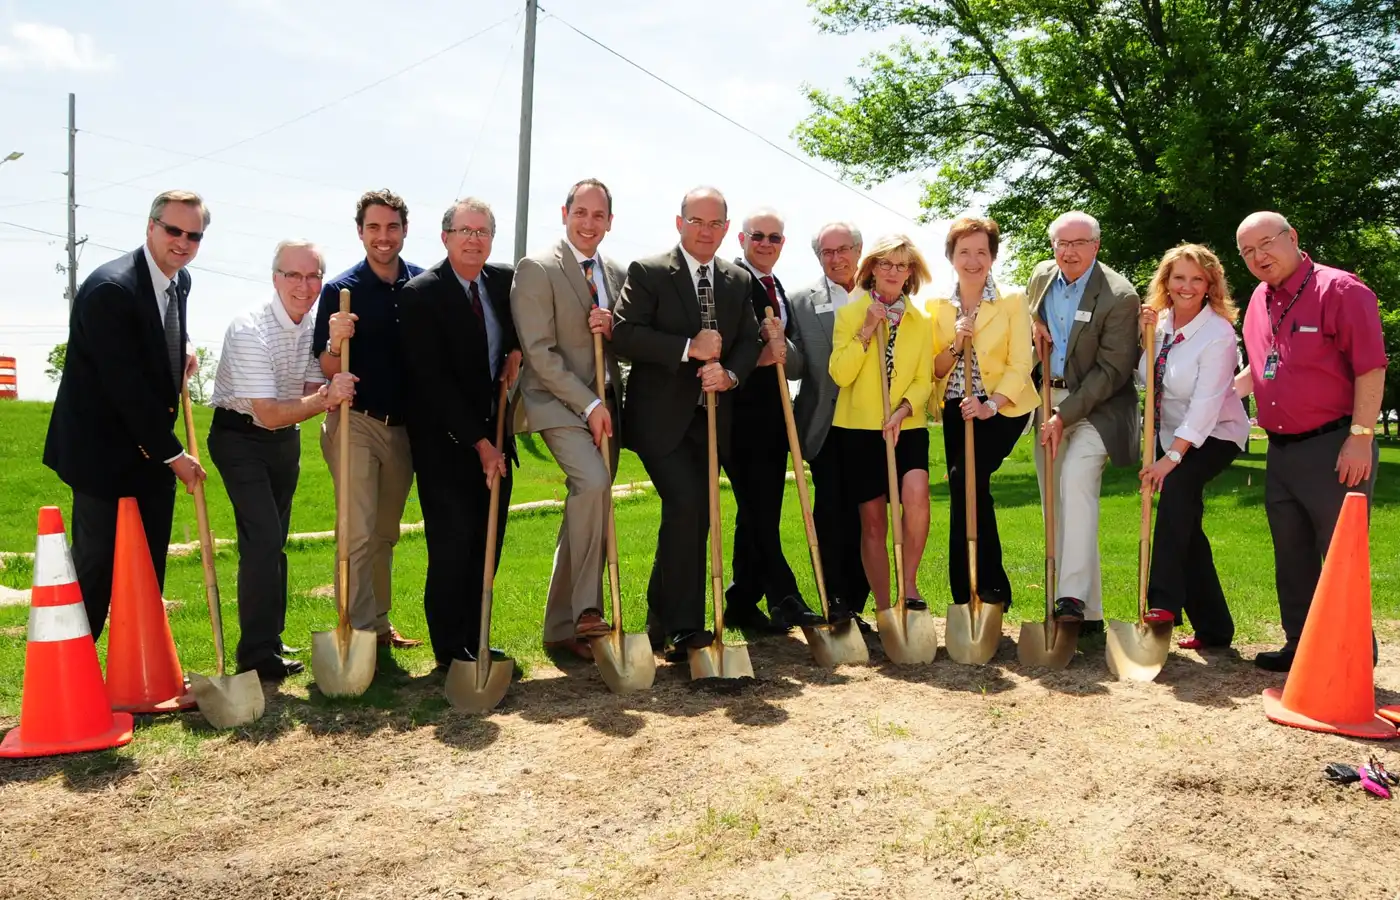 A group of people pose with shovel at a grounbreaking event